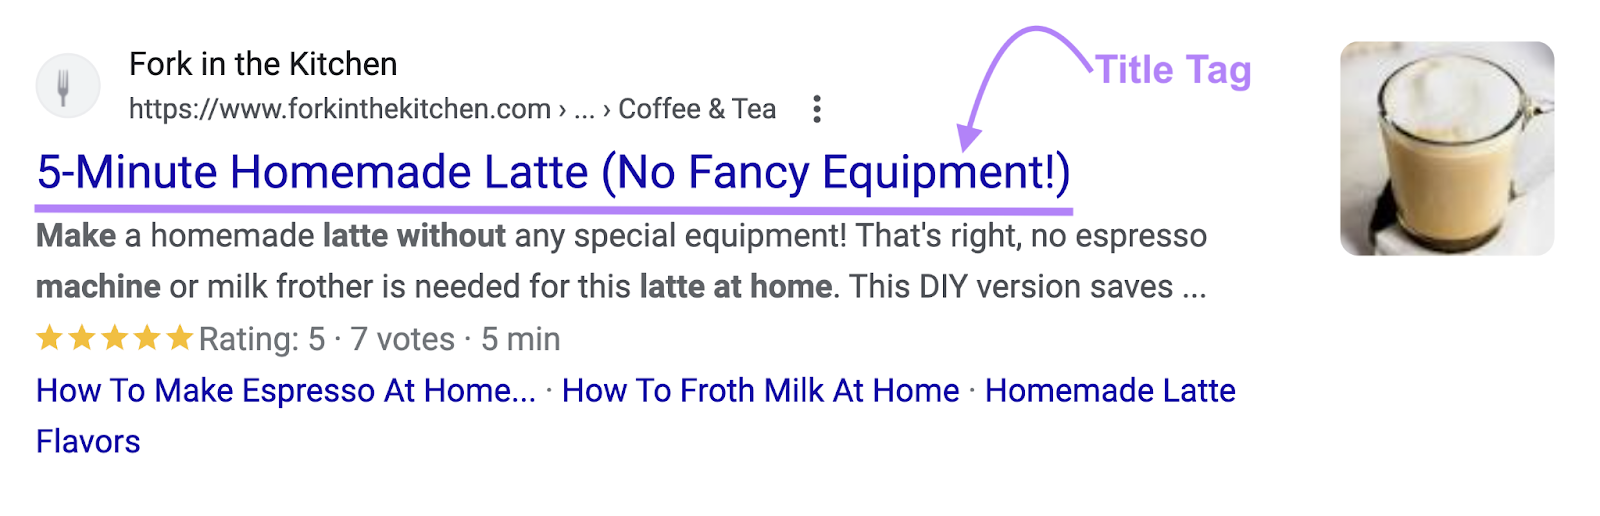 A title tag in search results that reads: "5-Minute Homemade Latte (No Fancy Equipment)"